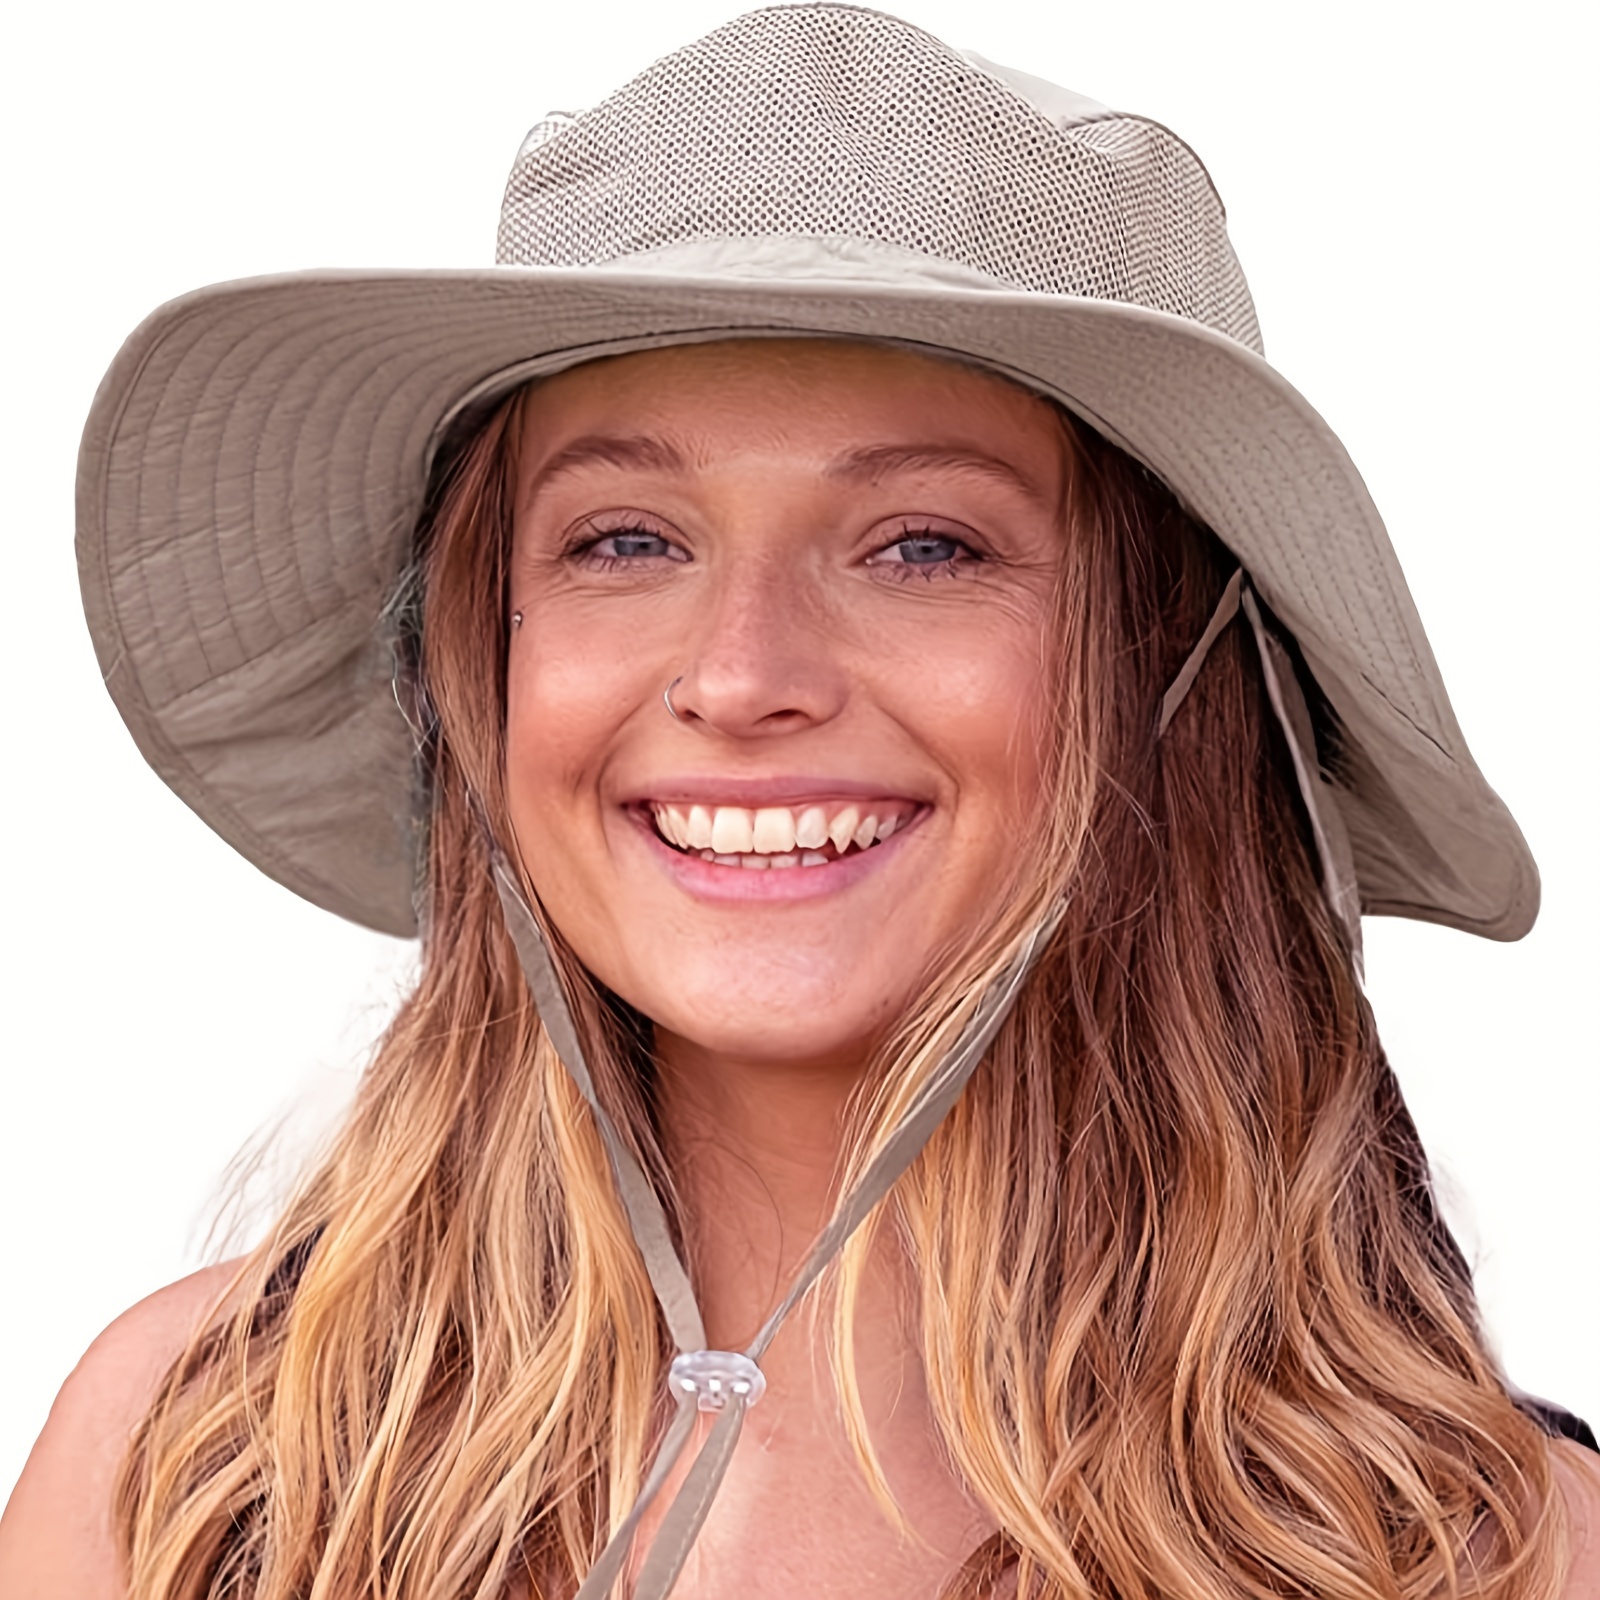 Women's Sun Hat With Wide Brim Neck Protection, Summer Upf 50 Uv Protection,  Breathable, Elastic, Foldable, Outdoor Sun